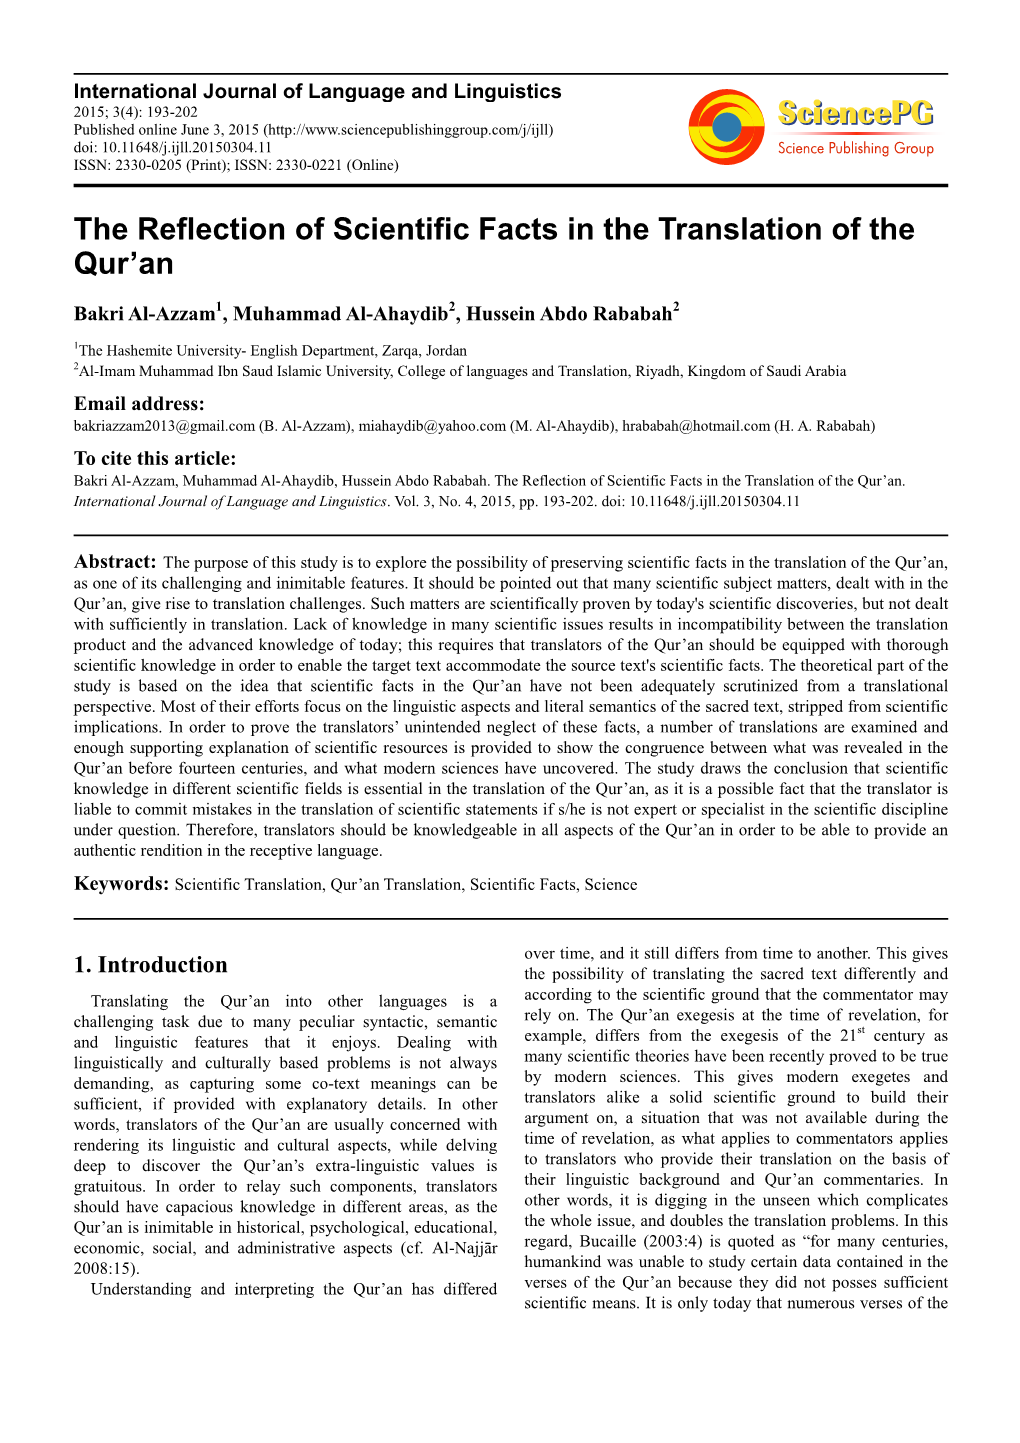 The Reflection of Scientific Facts in the Translation of the Qur'an